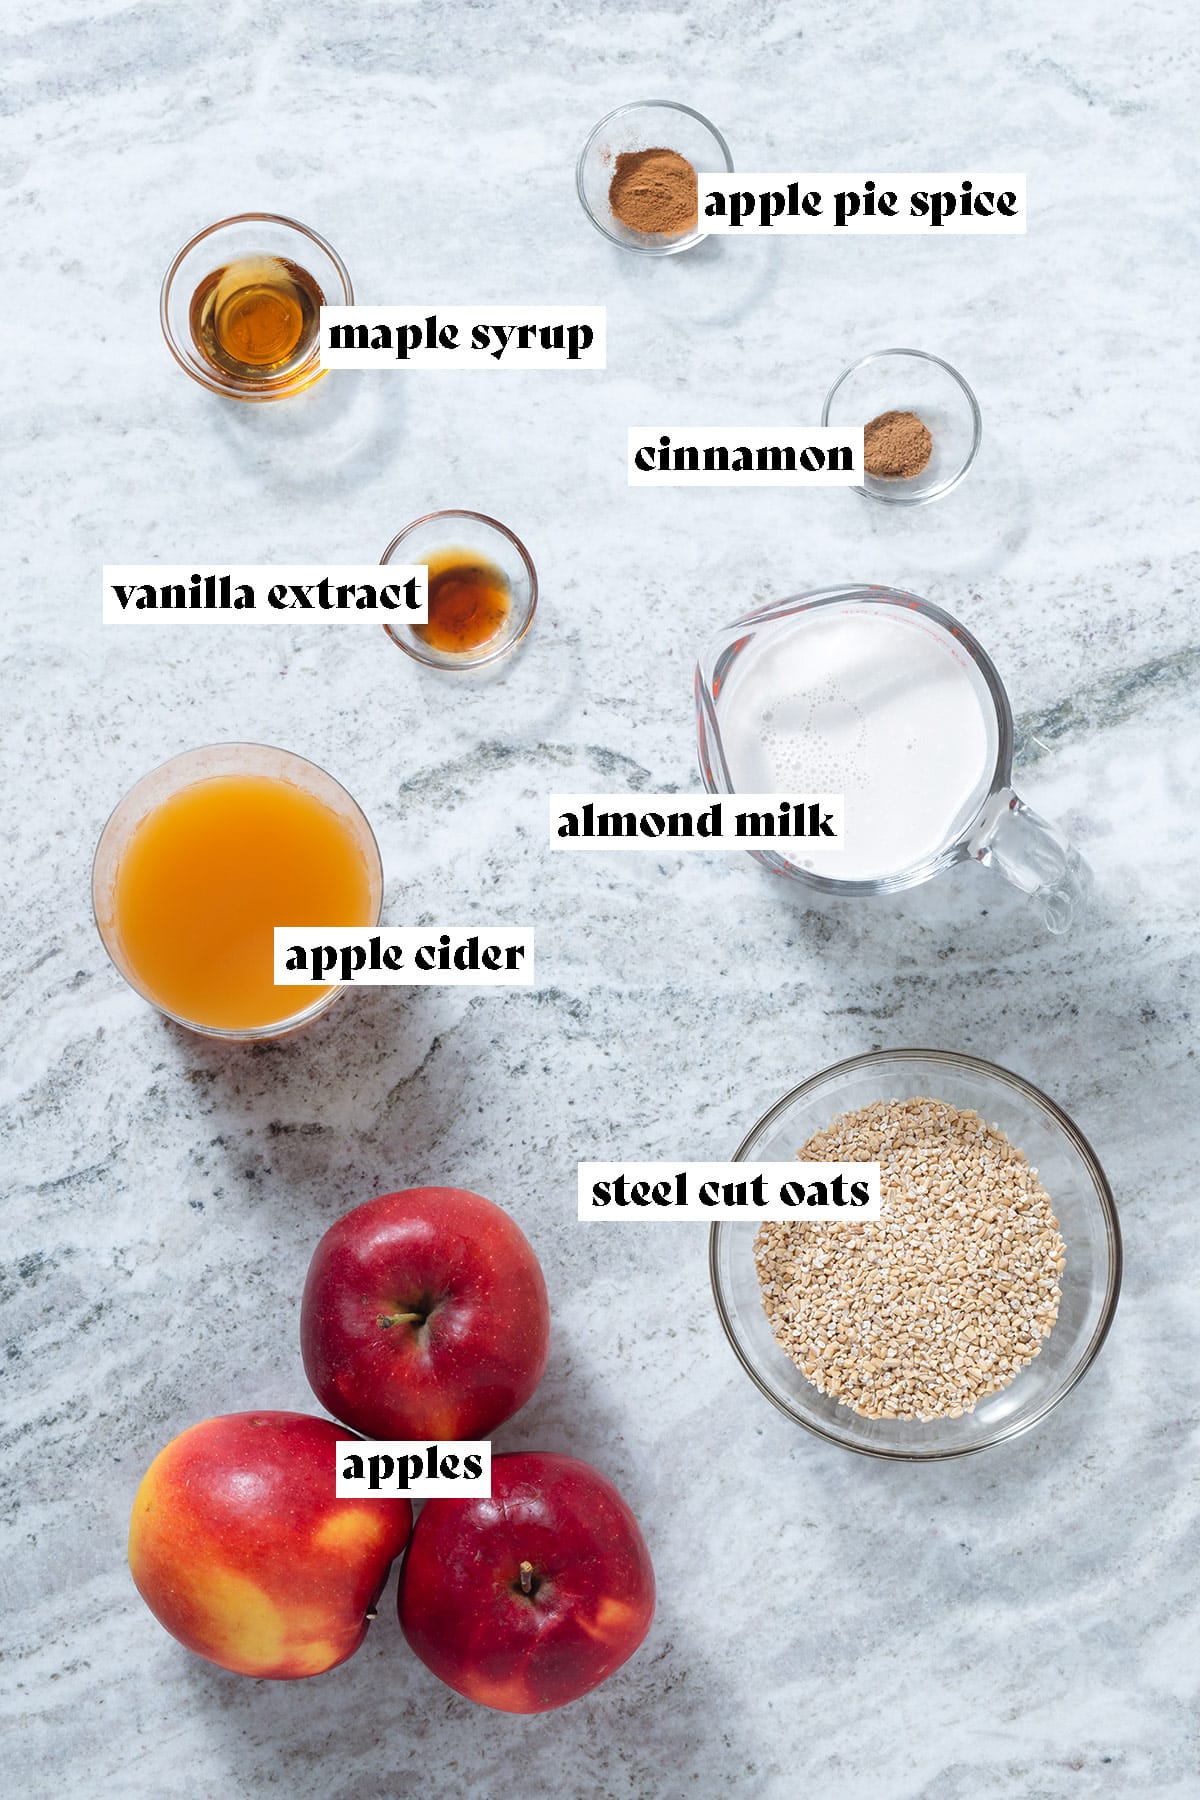 Apples, apple cider, steel cut oats, almond milk, and other measured out ingredients in glass bowls on a grey stone background with text overlay.